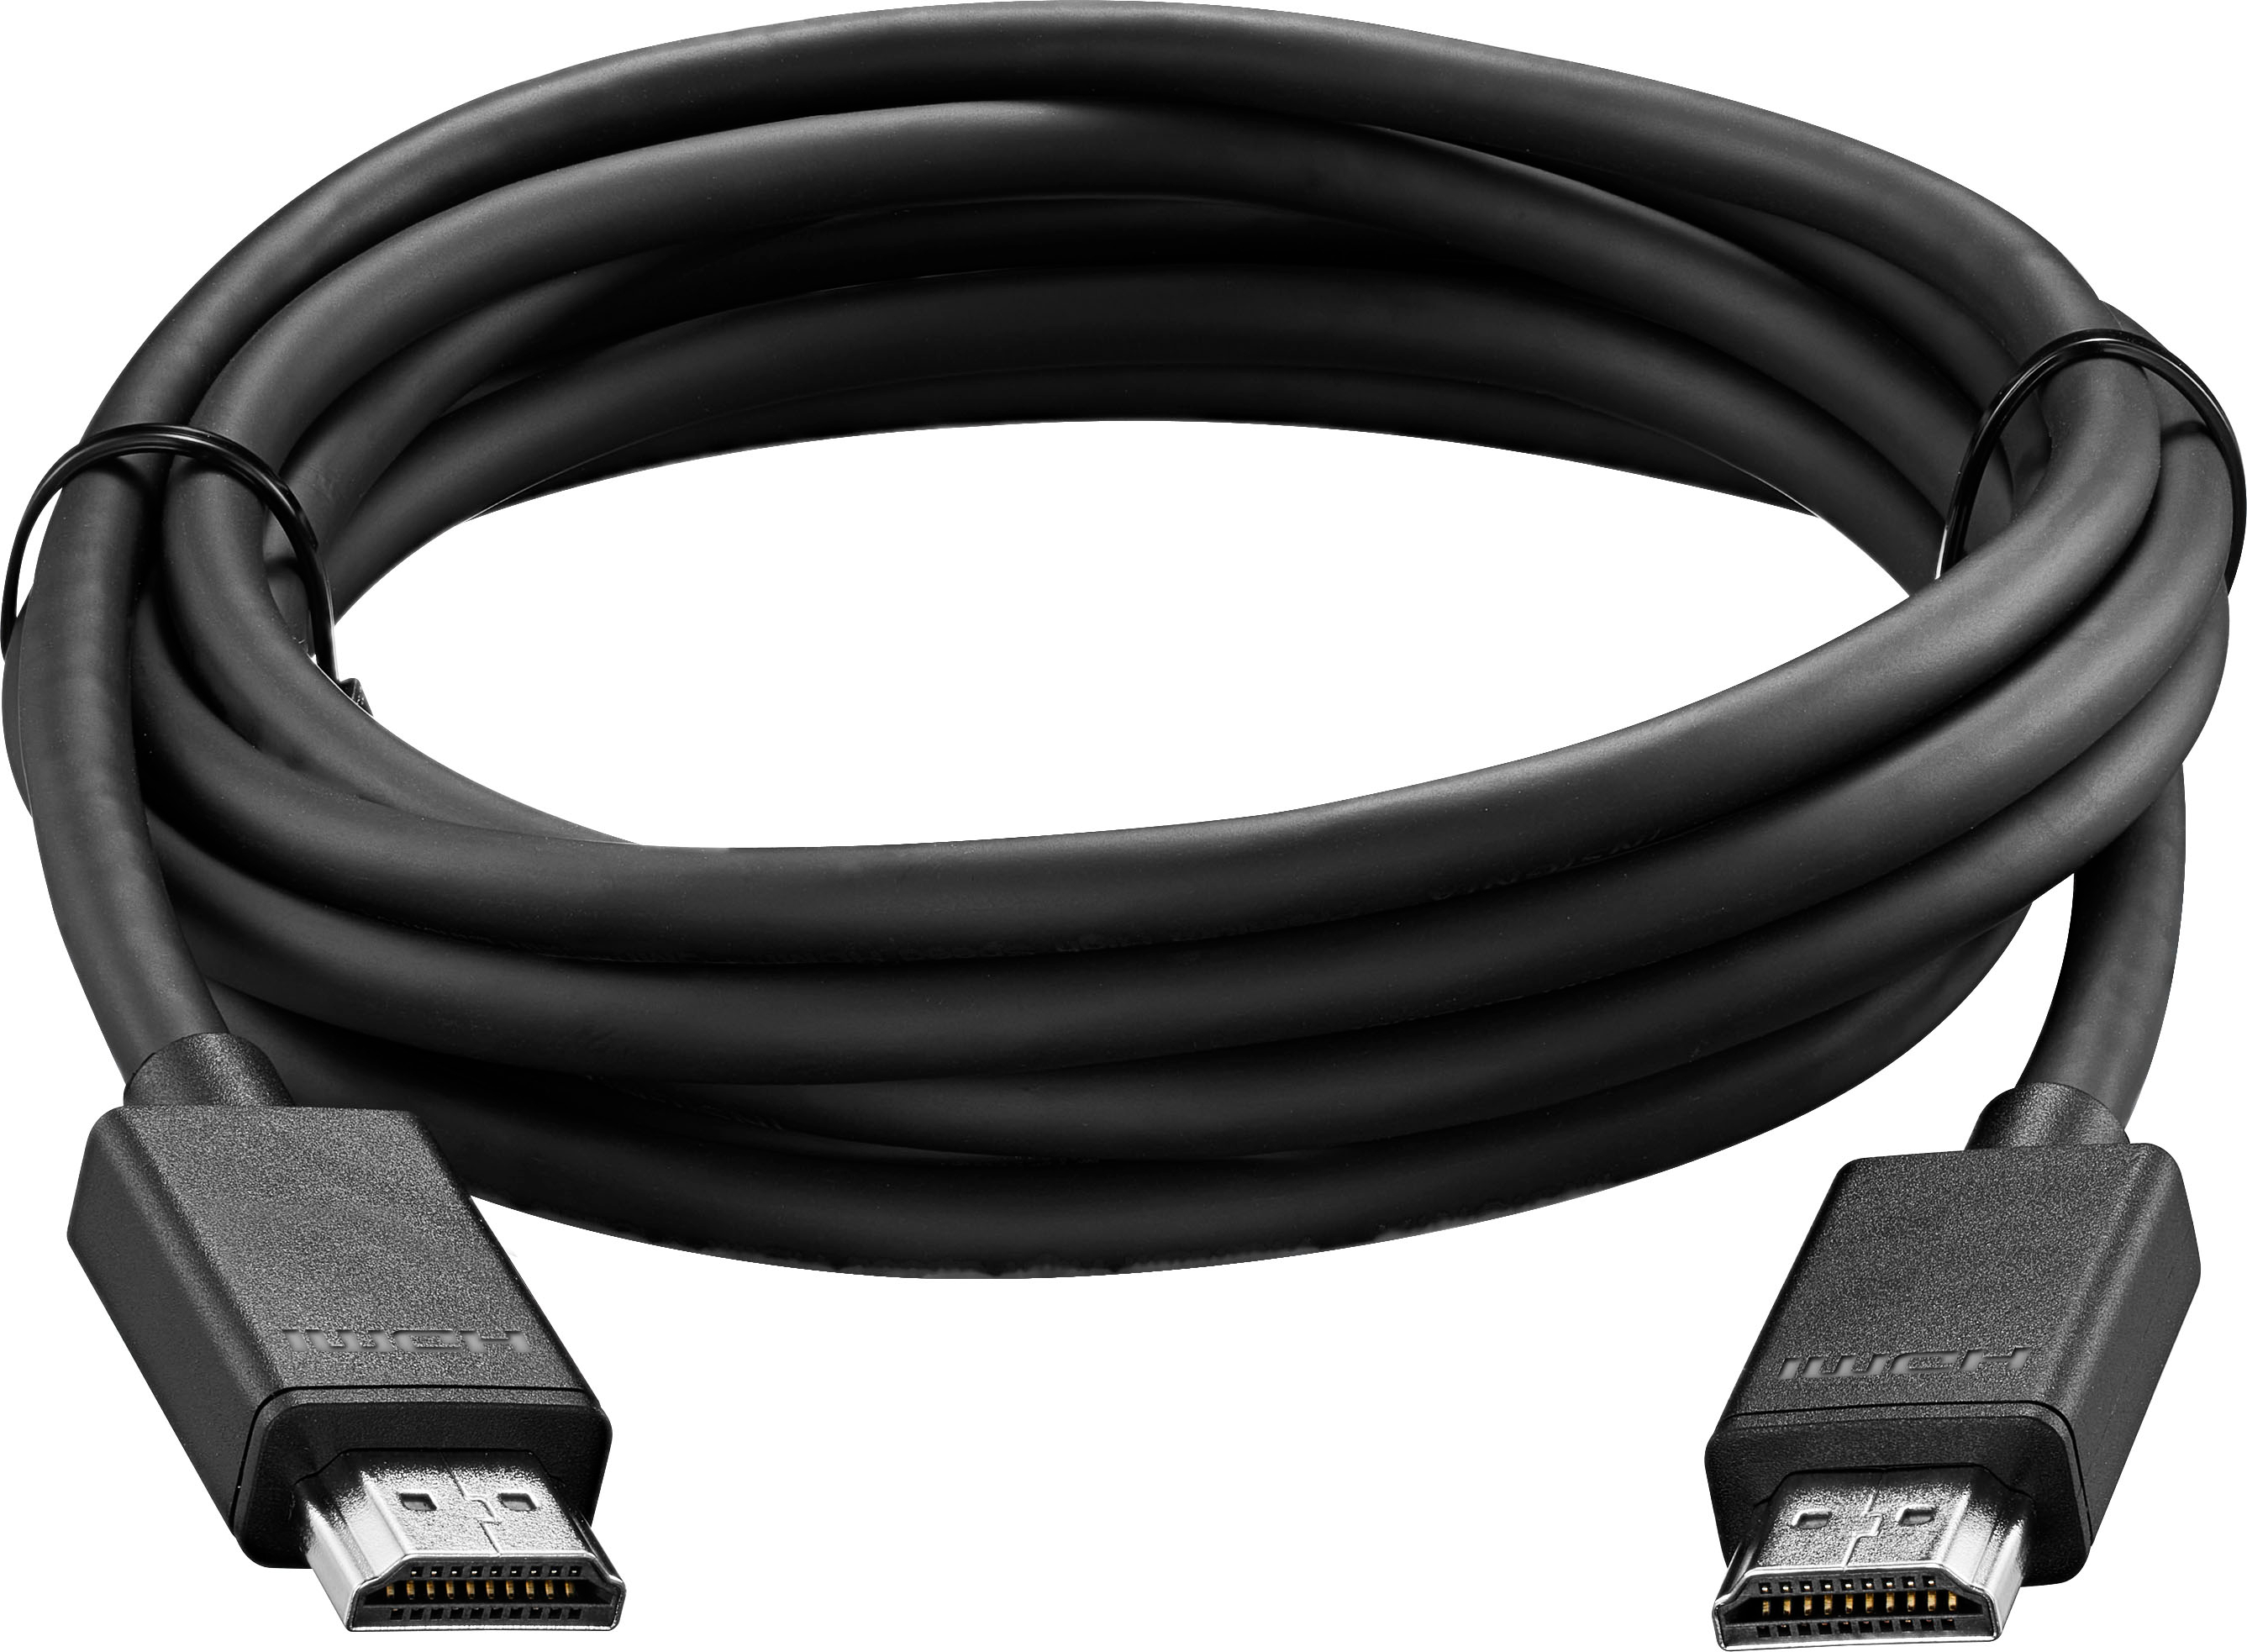 Insignia™ 6' 4K Ultra HD HDMI Cable (2-Pack) Black NS  - Best Buy